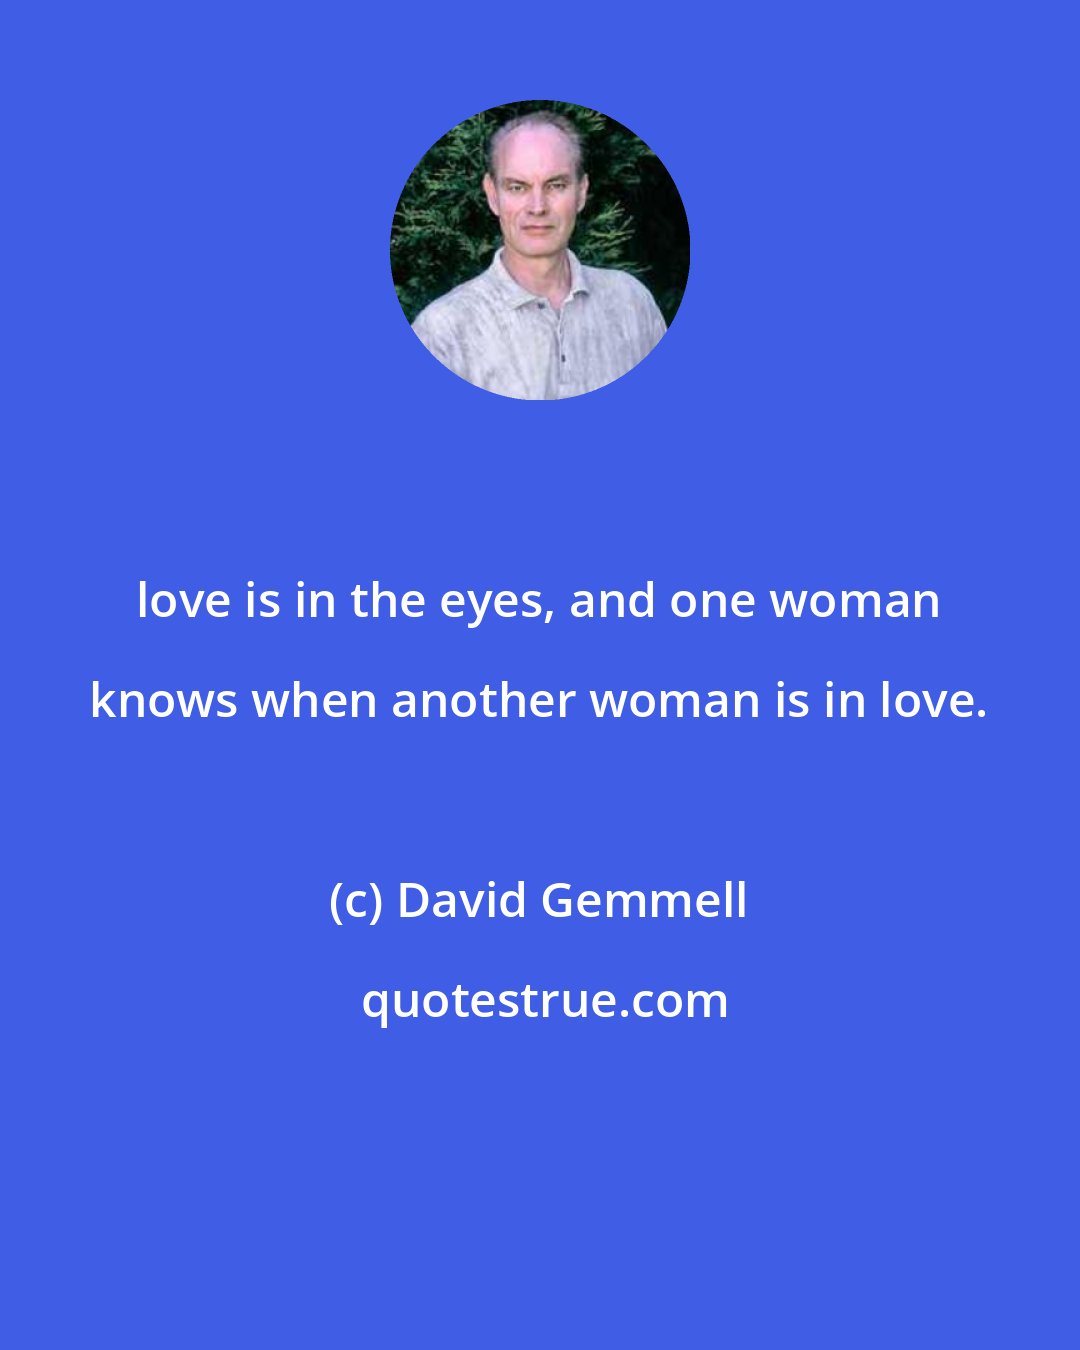 David Gemmell: love is in the eyes, and one woman knows when another woman is in love.